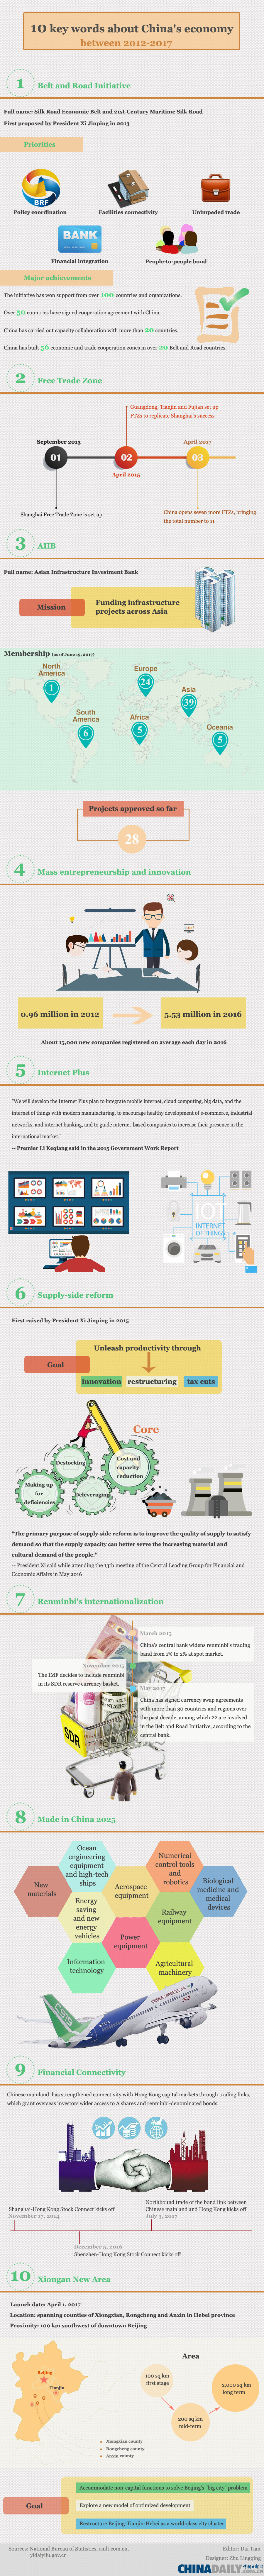 Infographic: 10 key words about China's economy